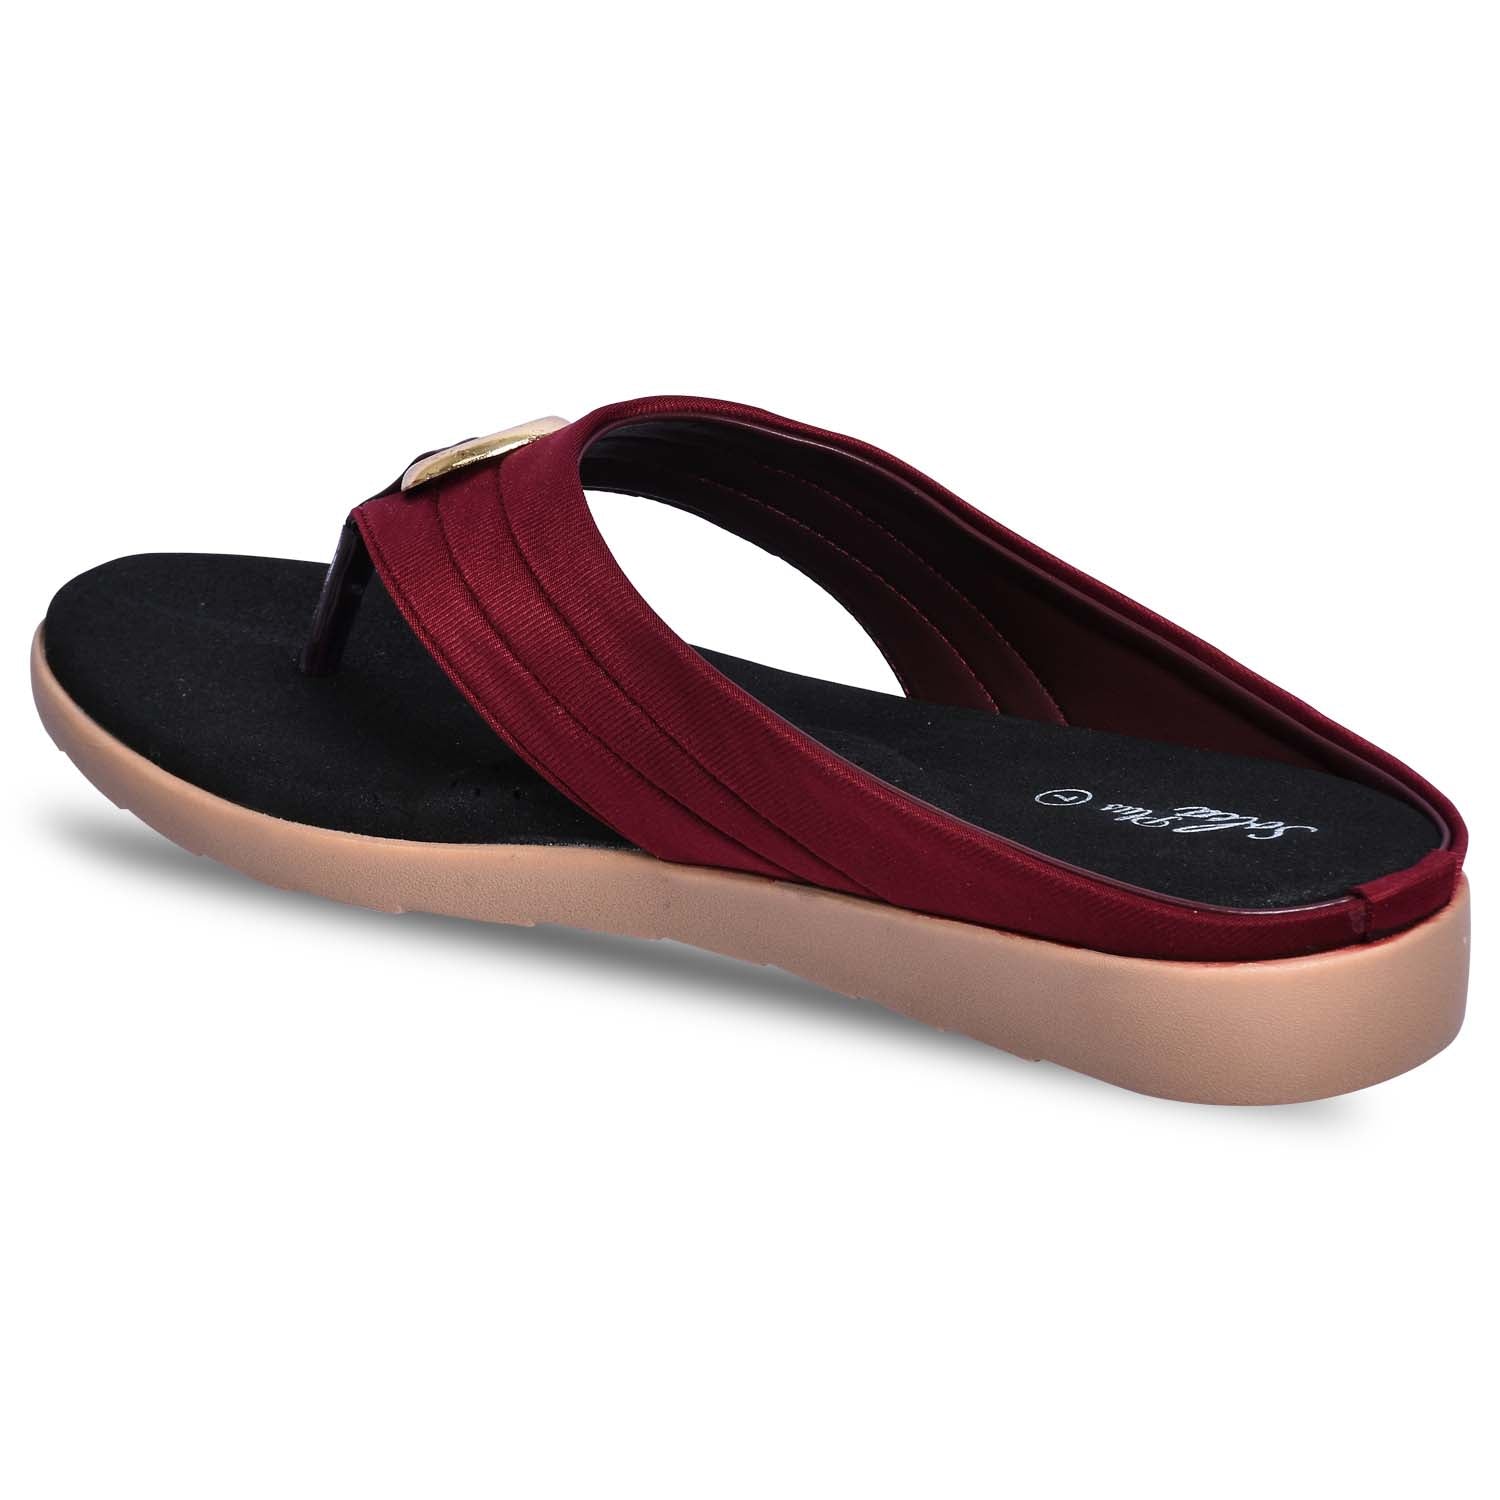 Paragon R1022L Women Sandals | Casual &amp; Formal Sandals | Stylish, Comfortable &amp; Durable | For Daily &amp; Occasion Wear